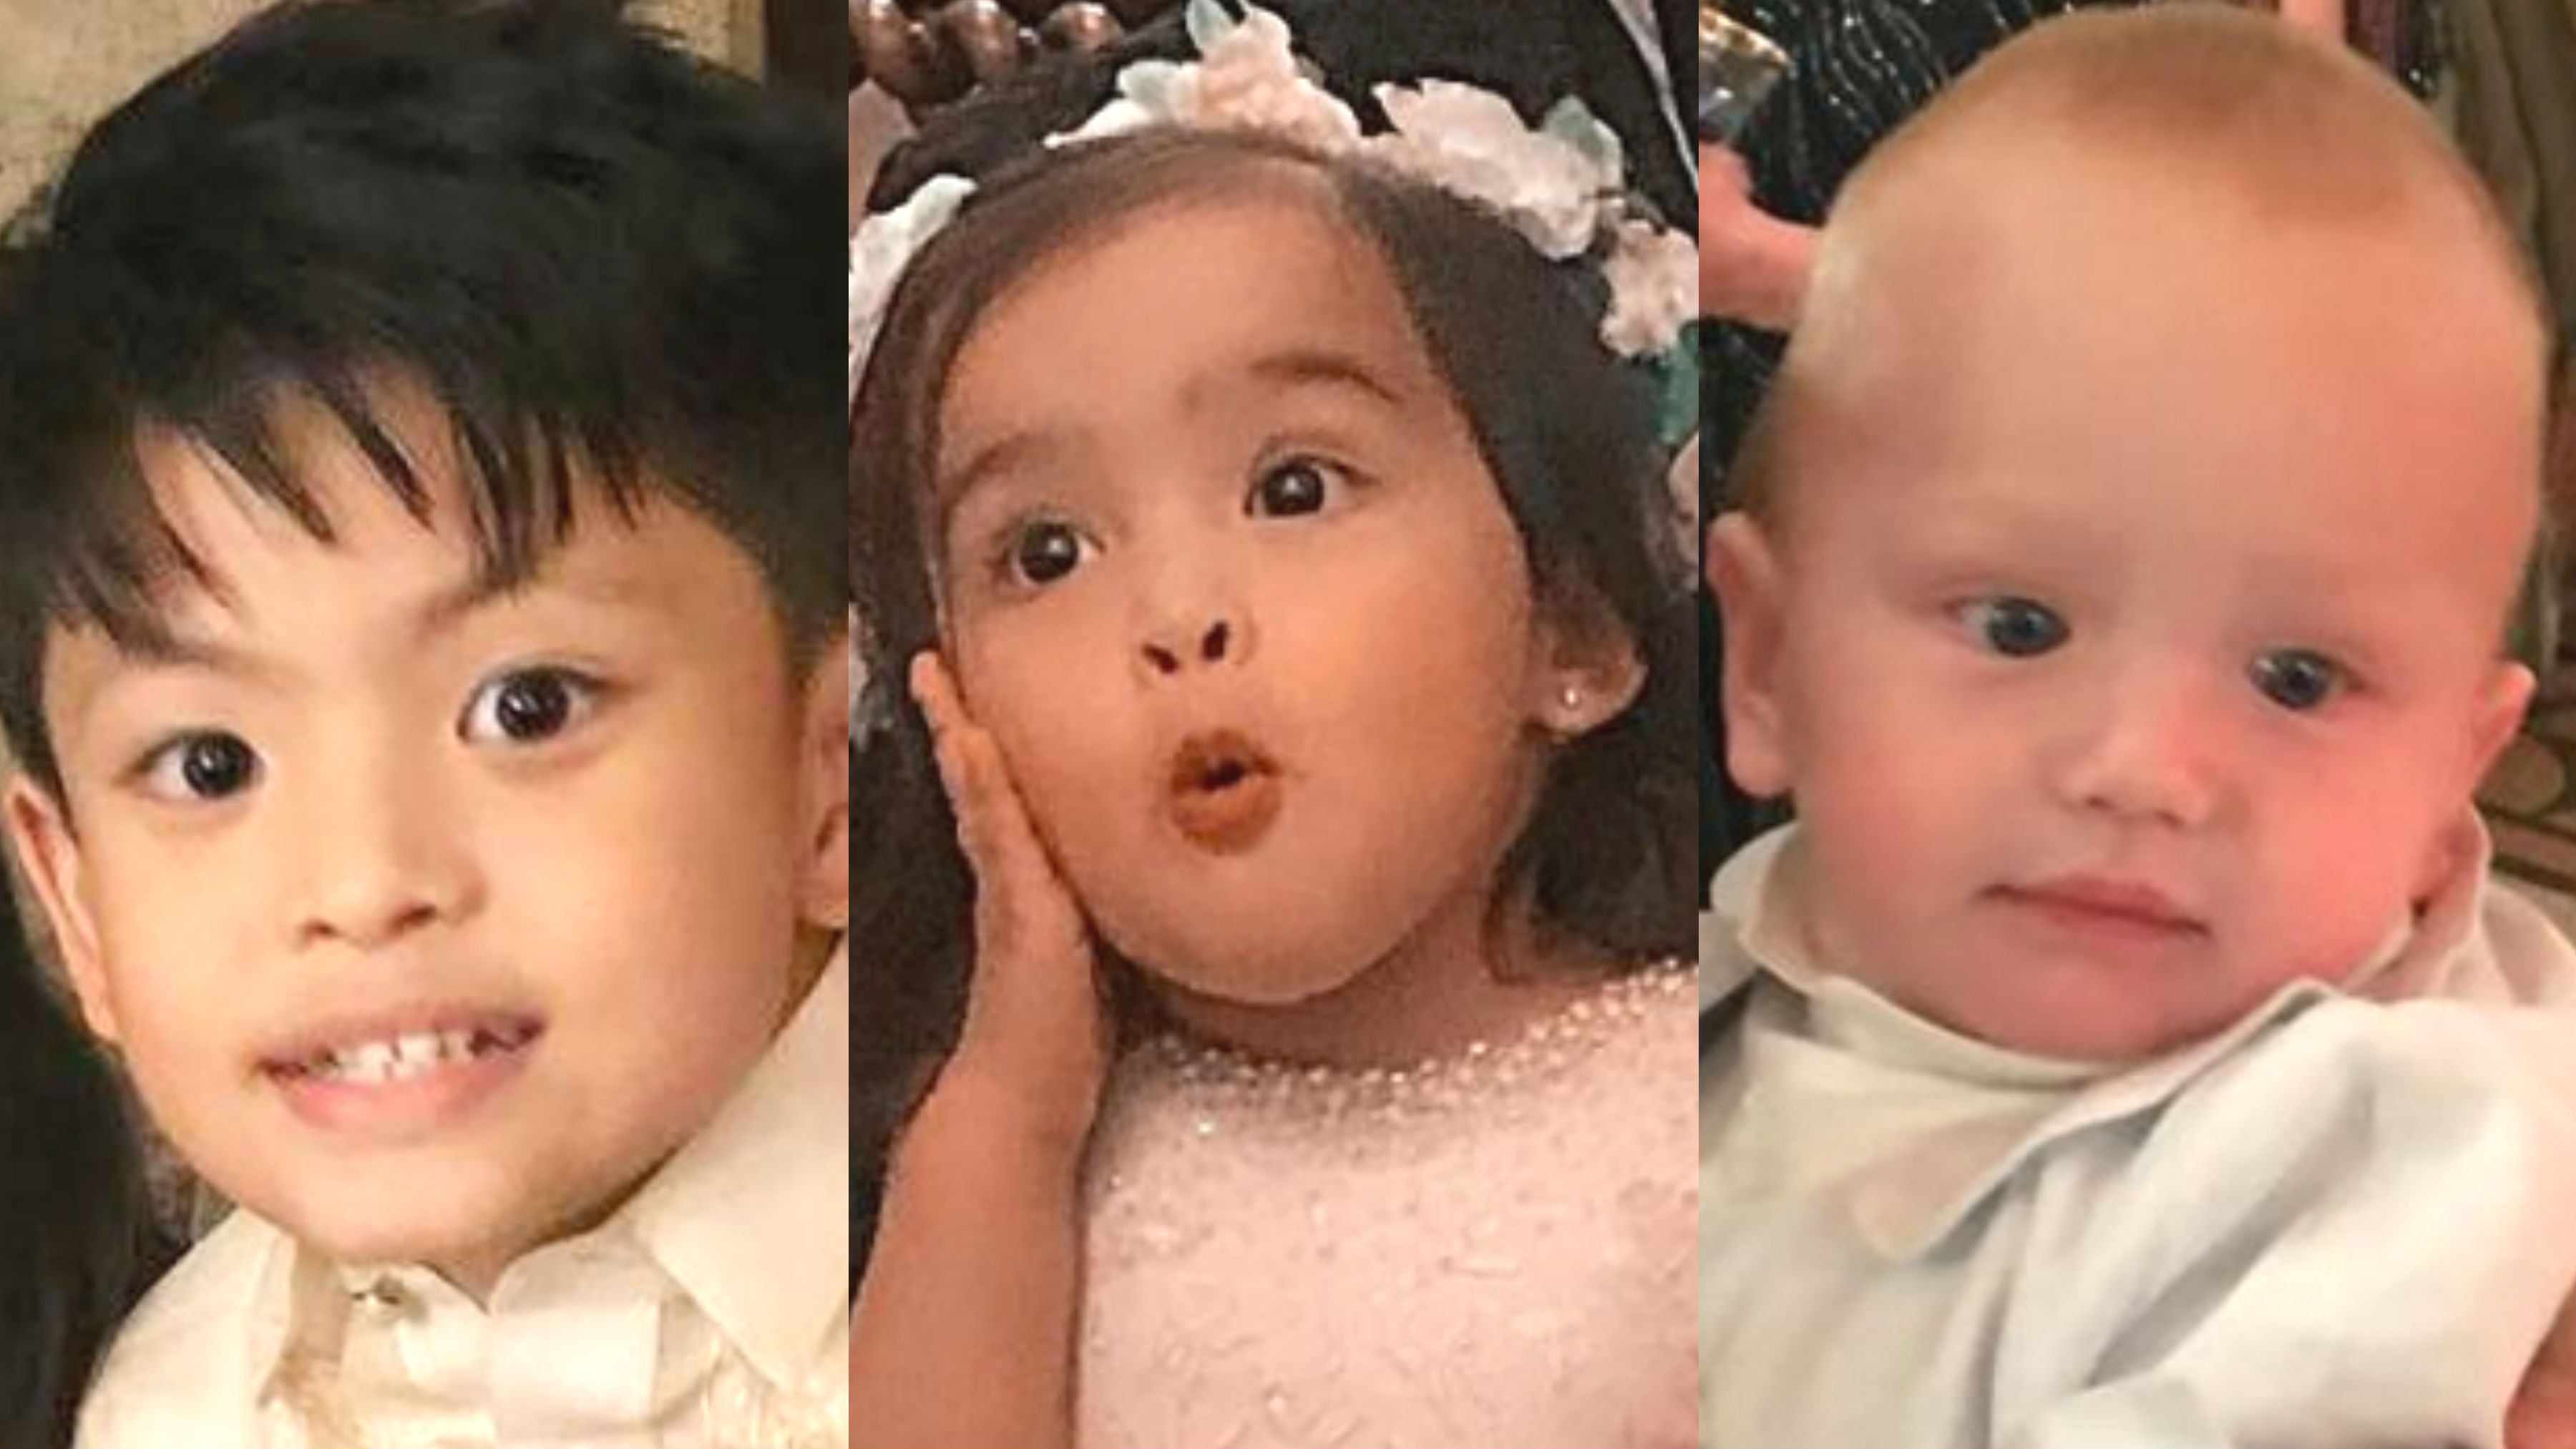 CELEBRITY KIDS. Nate Alcasid, Maria Letizia Dantes, and Archie Burnand attend the Vicki Belo- Hayden Kho wedding with their parents in Paris. Screengrab from Instagram/@reginevalcasid/@bcbench/@michaelcinco5 